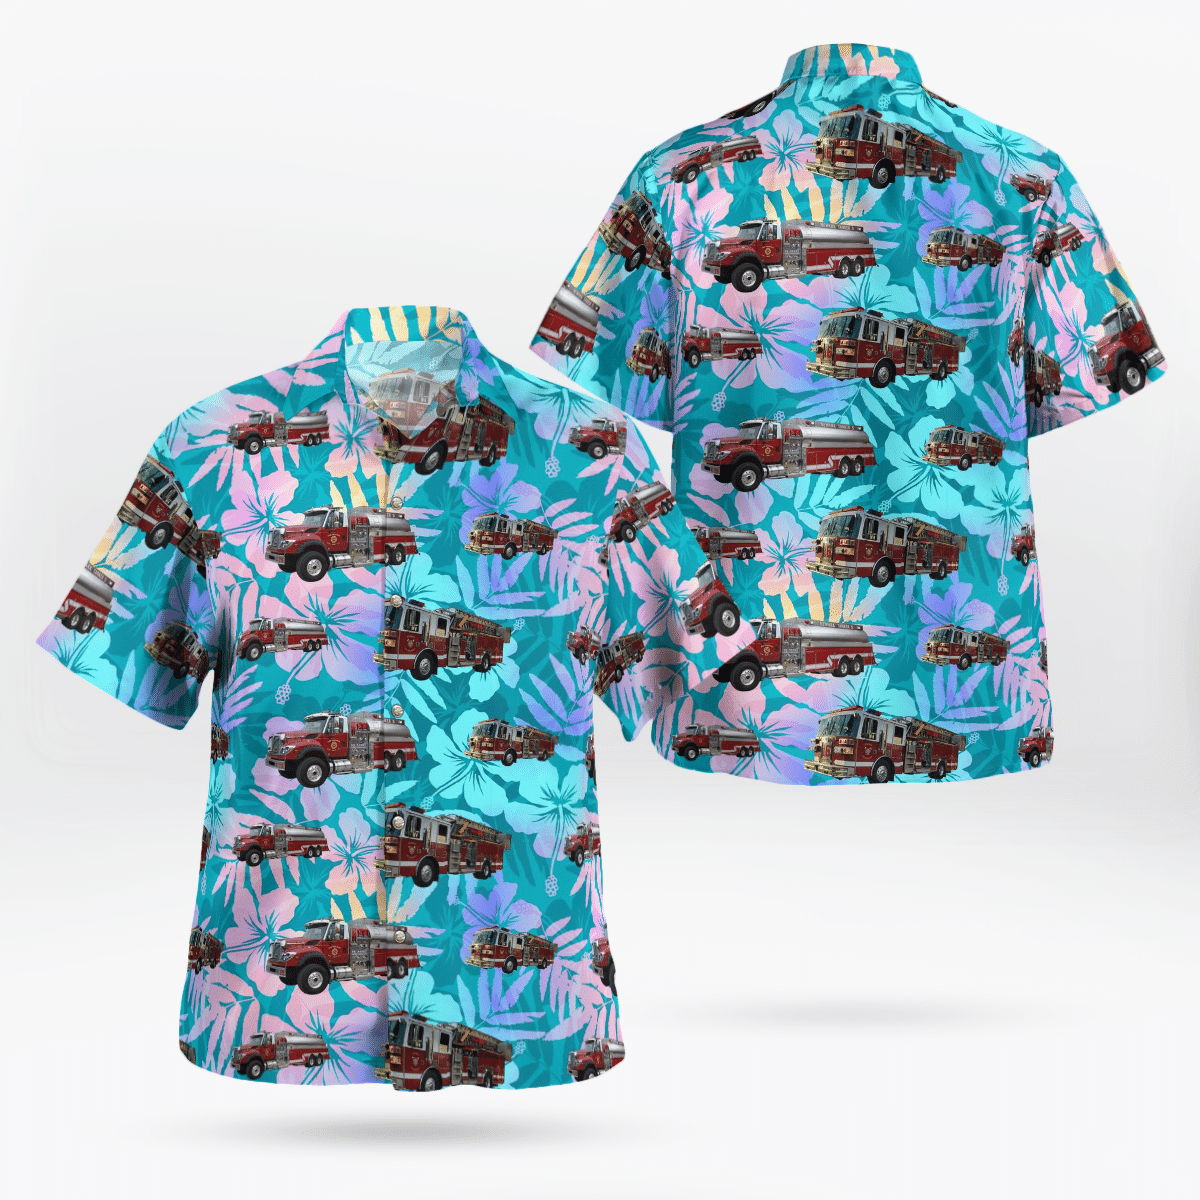 If you are in need of a new summertime look, pick up this Hawaiian shirt 93